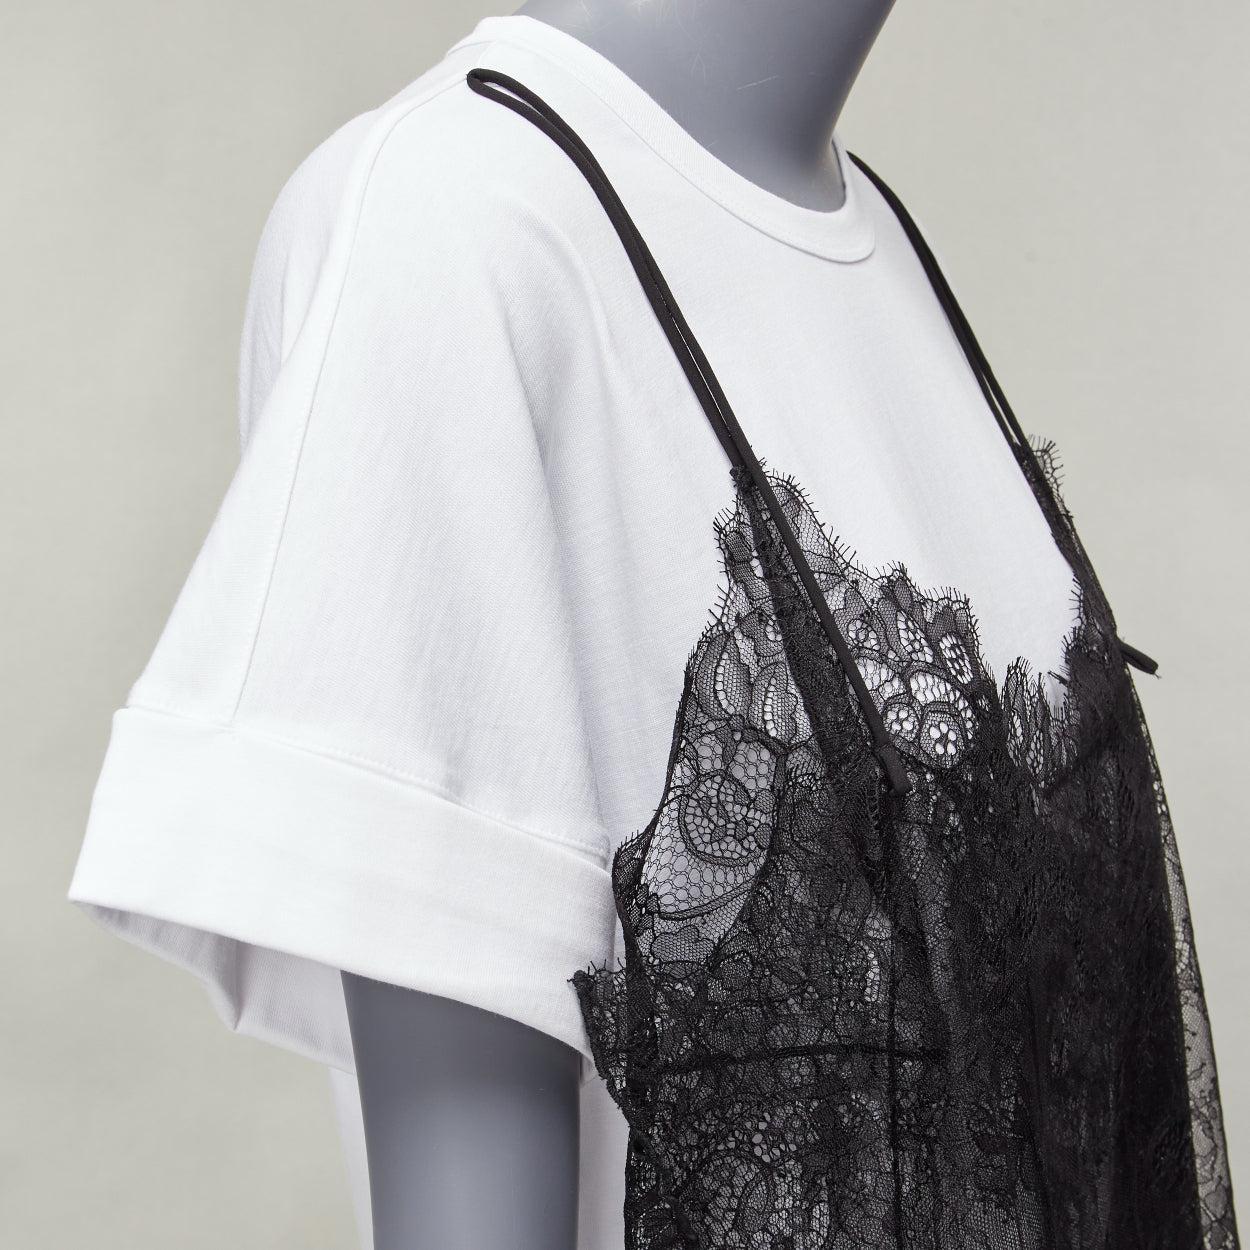 PHILOSOPHY Lorenzo Serafini tromp loiel draped silk camisole white tshirt XS
Reference: AAWC/A00749
Brand: Philosophy
Designer: Lorenzo Serafini
Model: 211G A07050746
Material: Cotton
Color: White, Black
Pattern: Solid
Closure: Pullover
Extra